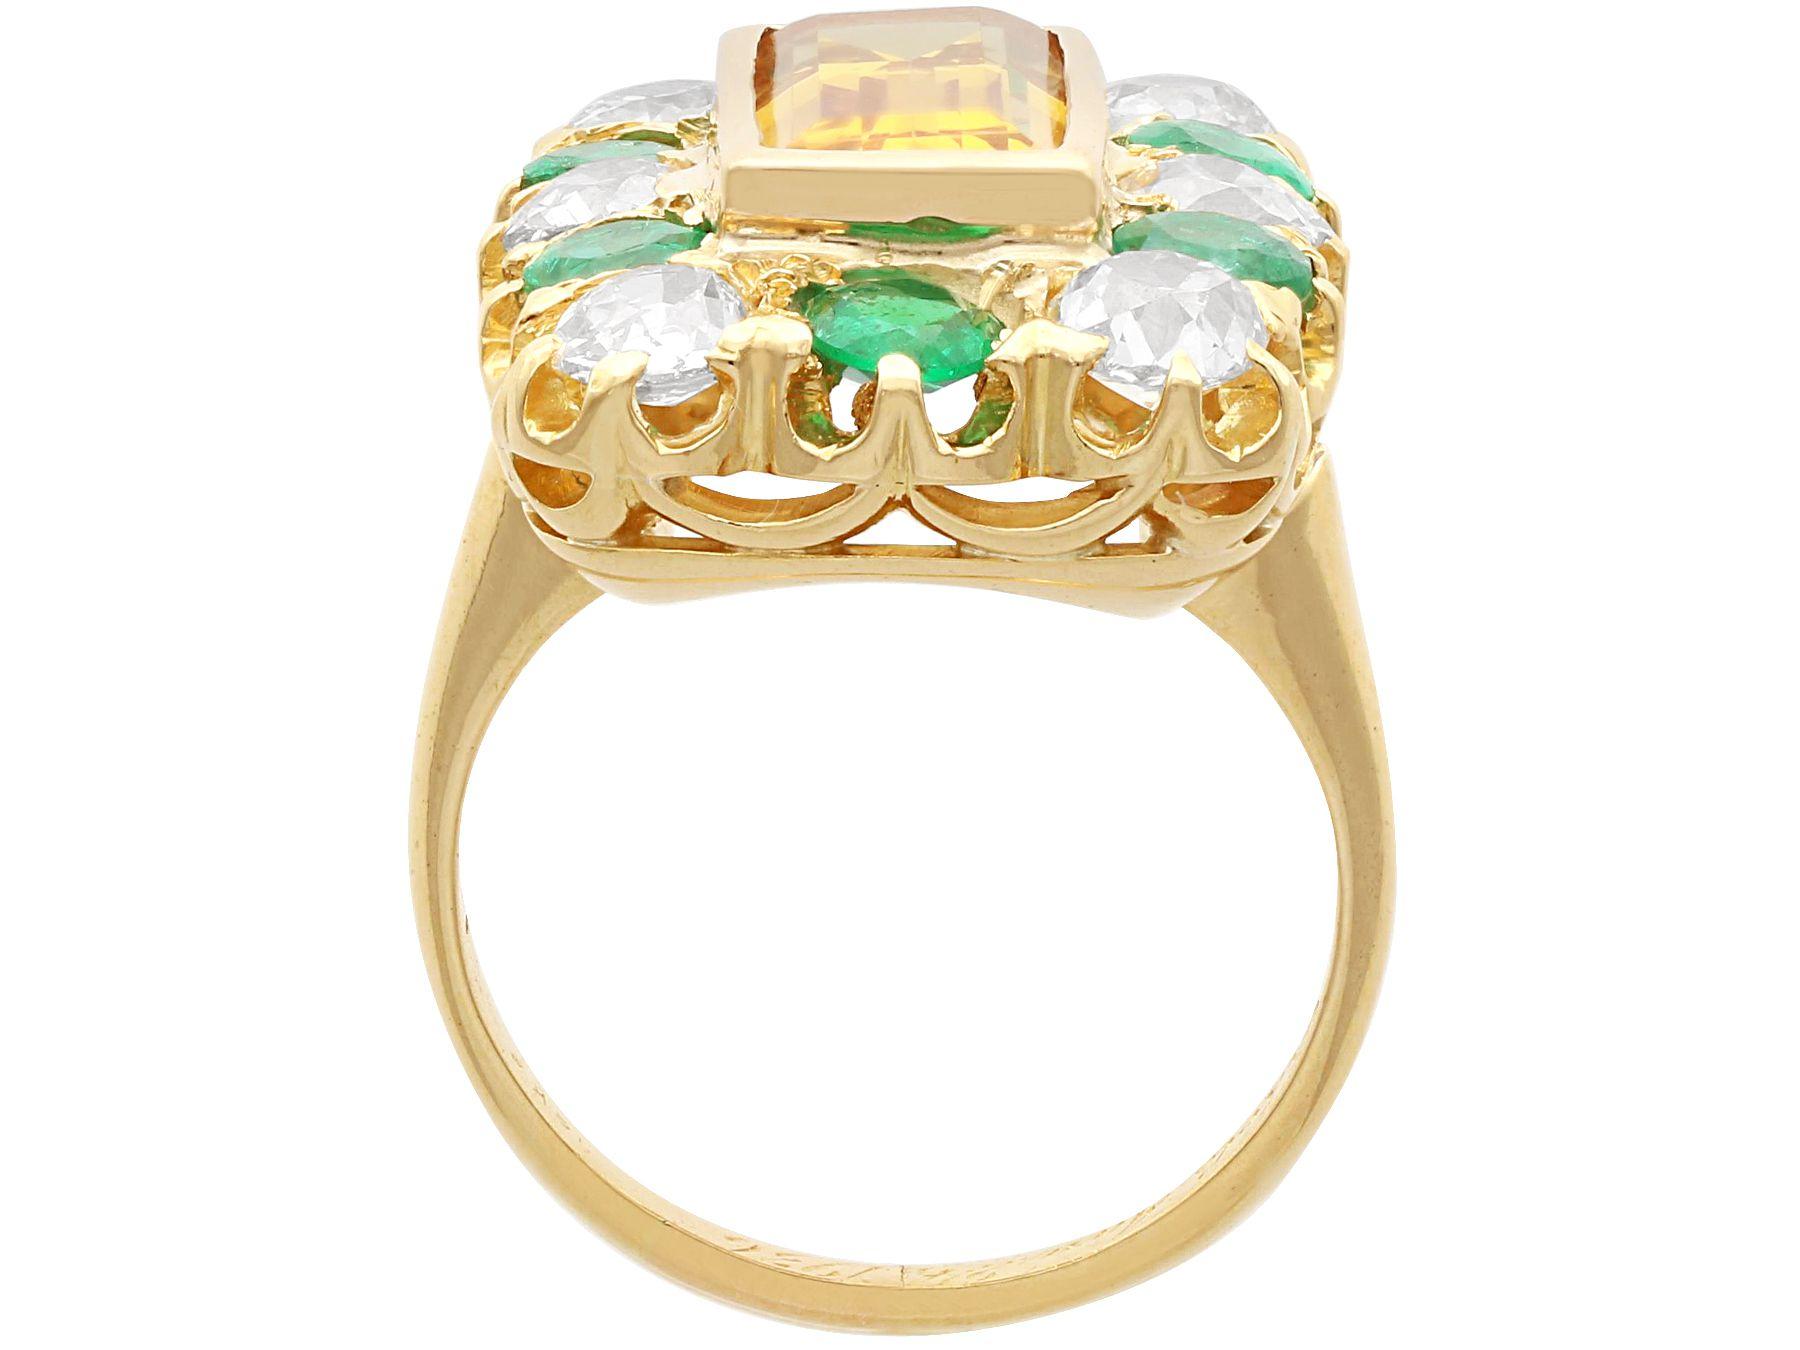 3.45 Carat Topaz and 1.86 Carat Emerald Diamond and Yellow Gold Dress Ring In Excellent Condition For Sale In Jesmond, Newcastle Upon Tyne